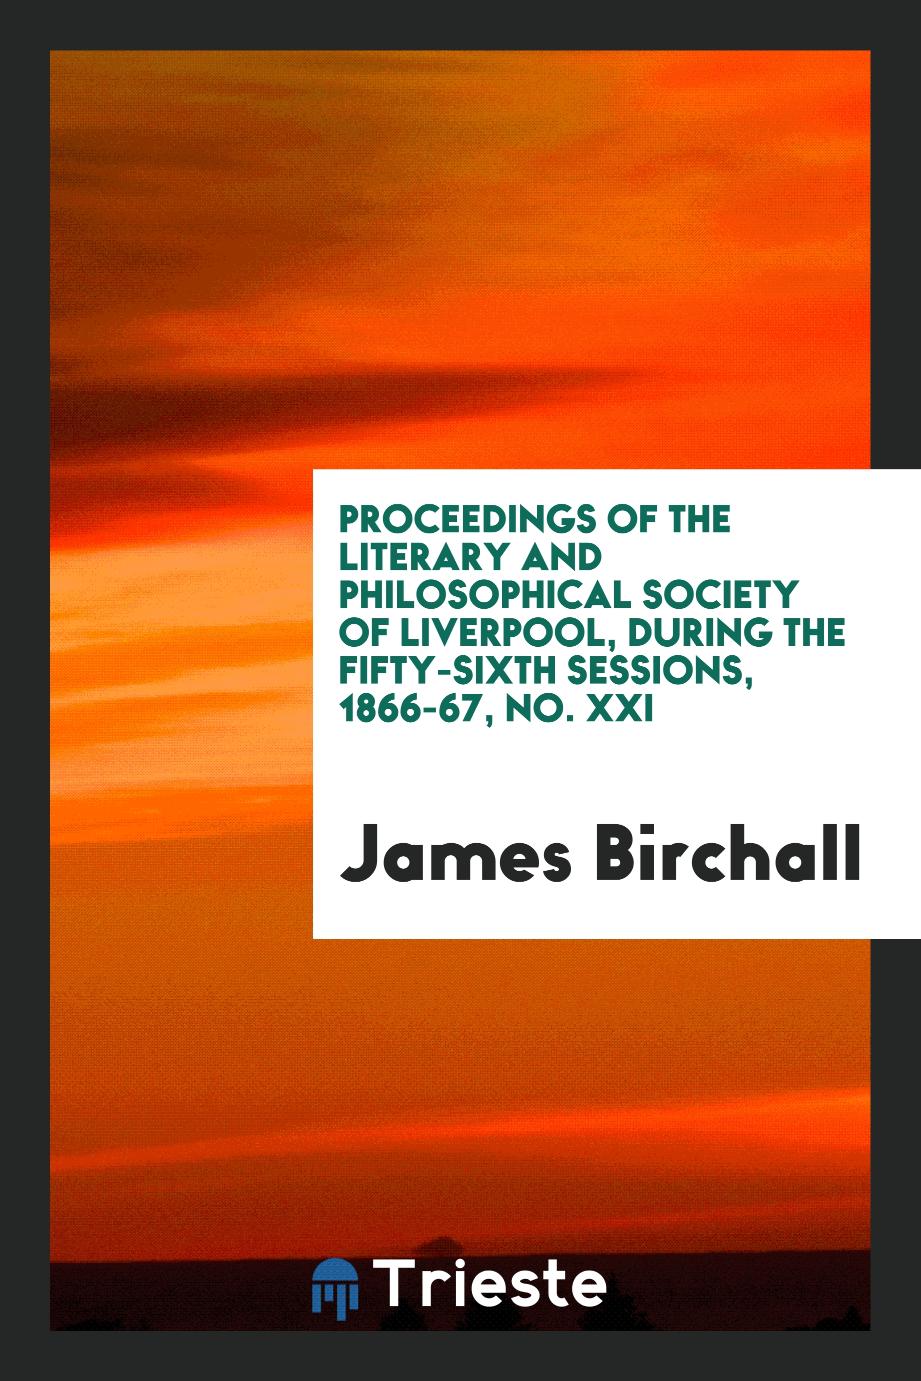 Proceedings of the Literary and Philosophical Society of Liverpool, during the Fifty-Sixth Sessions, 1866-67, No. XXI